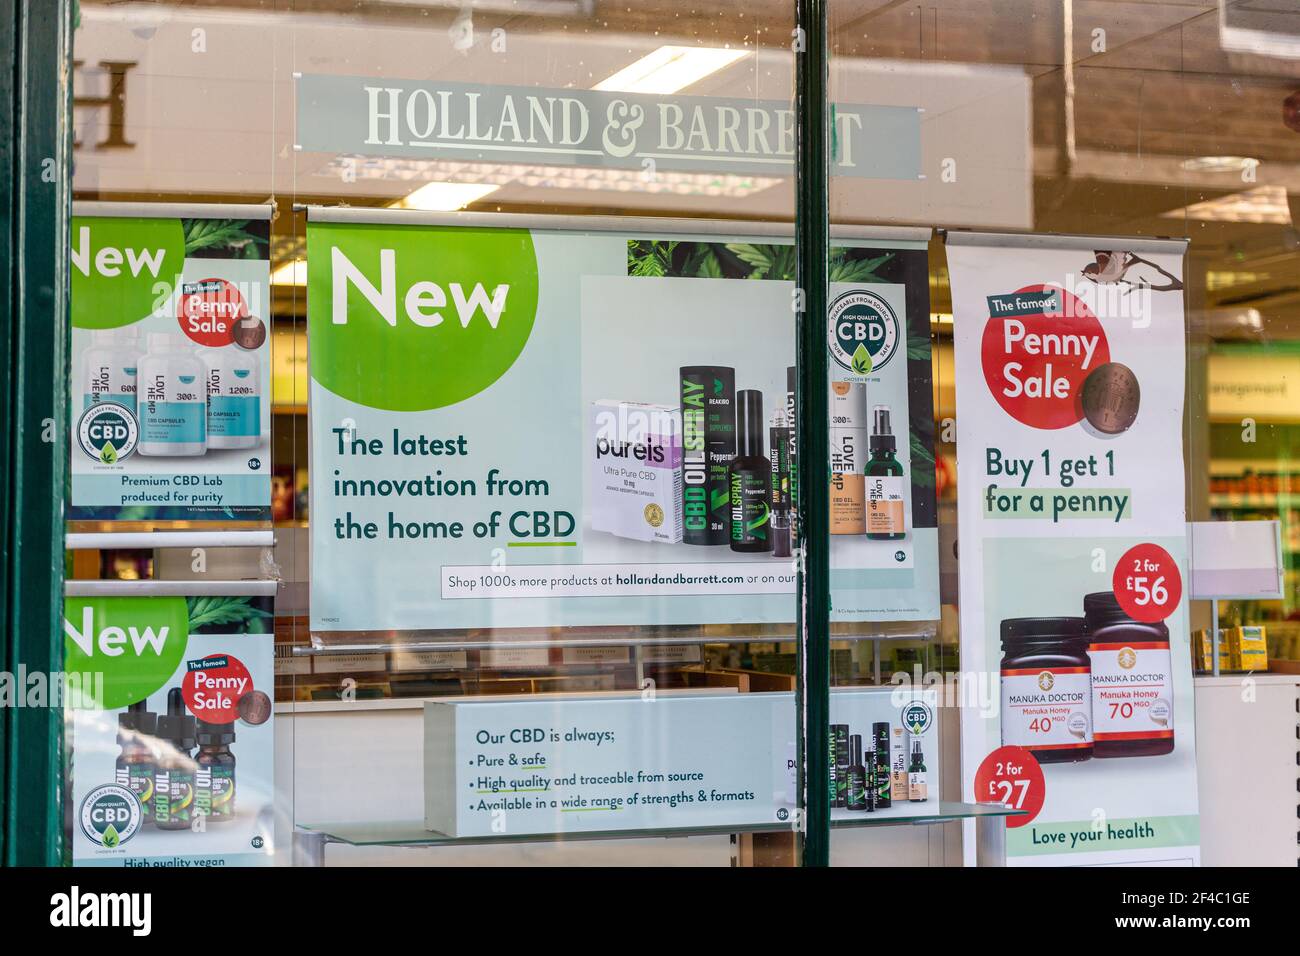 Woodbridge, Suffolk, UK February 10 2021: A shop display in the UK showing the now legal CBD oil products. Alternative natural medicine concept Stock Photo